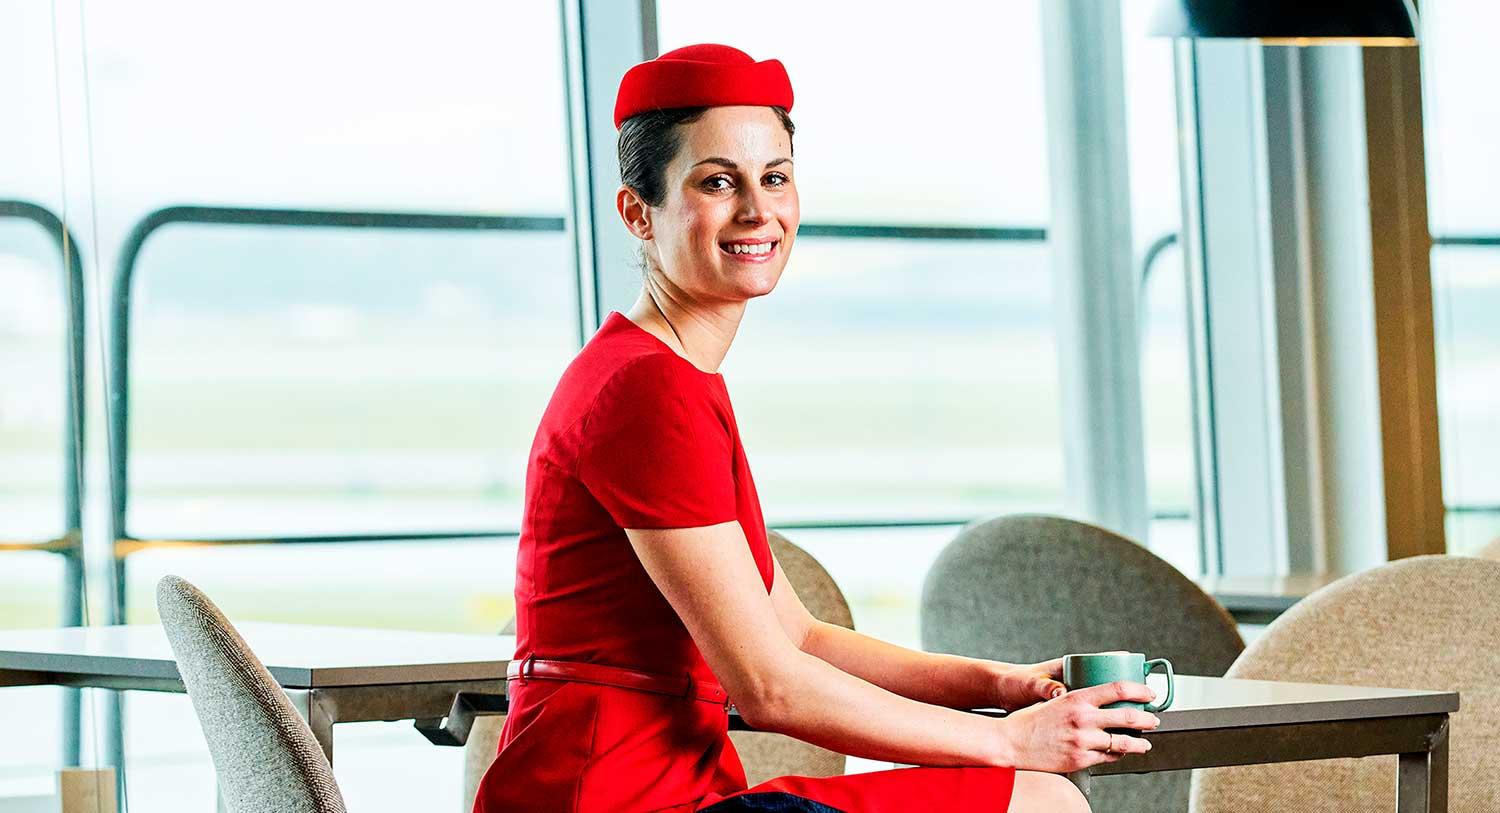 Red Cabin crew hat